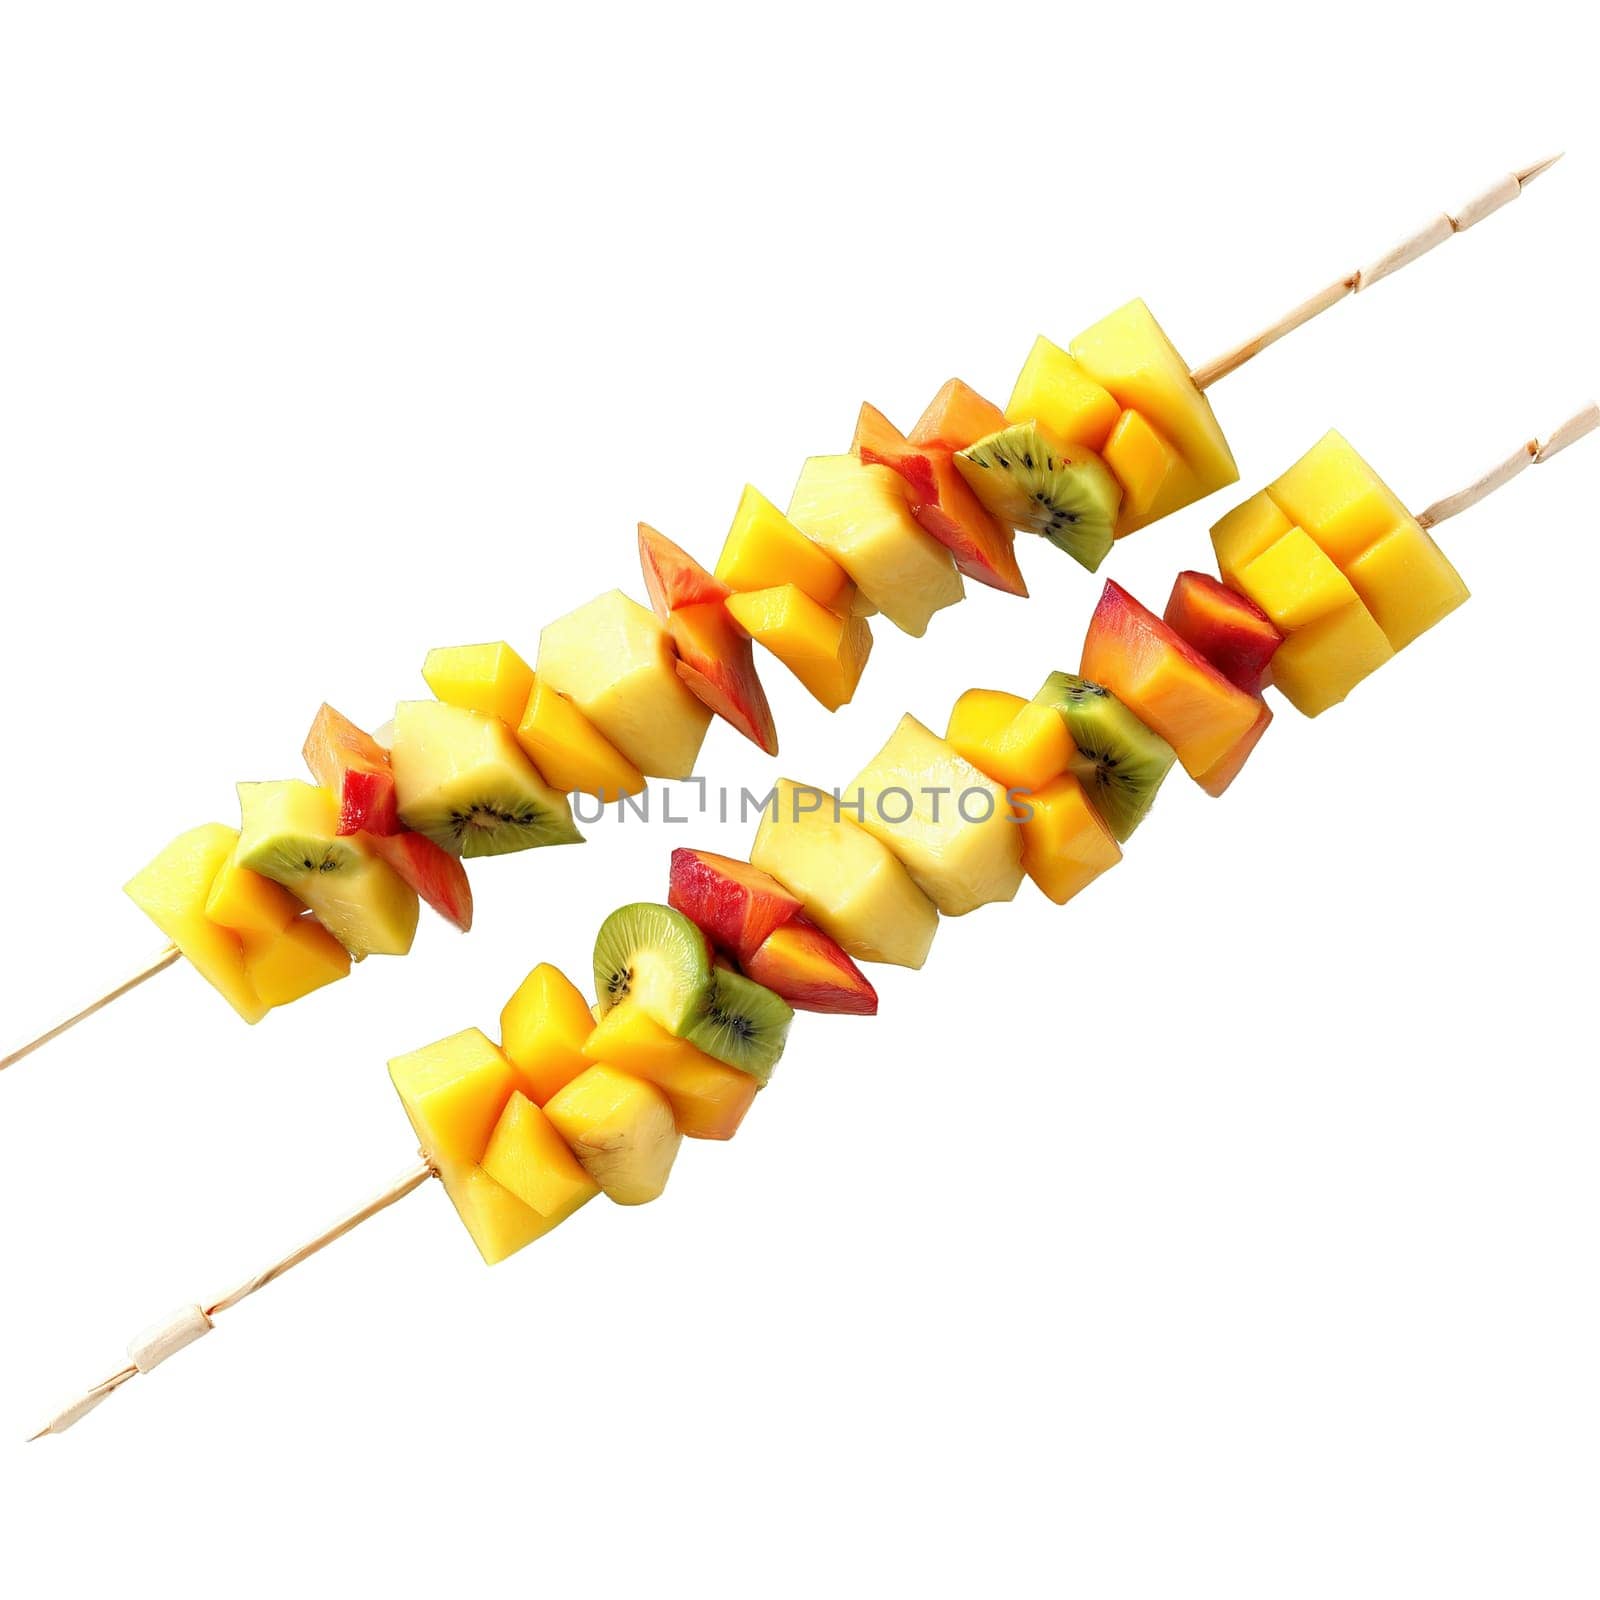 Breakfast fruit kebabs with cubes of pineapple mango and papaya threaded onto skewers and served by panophotograph